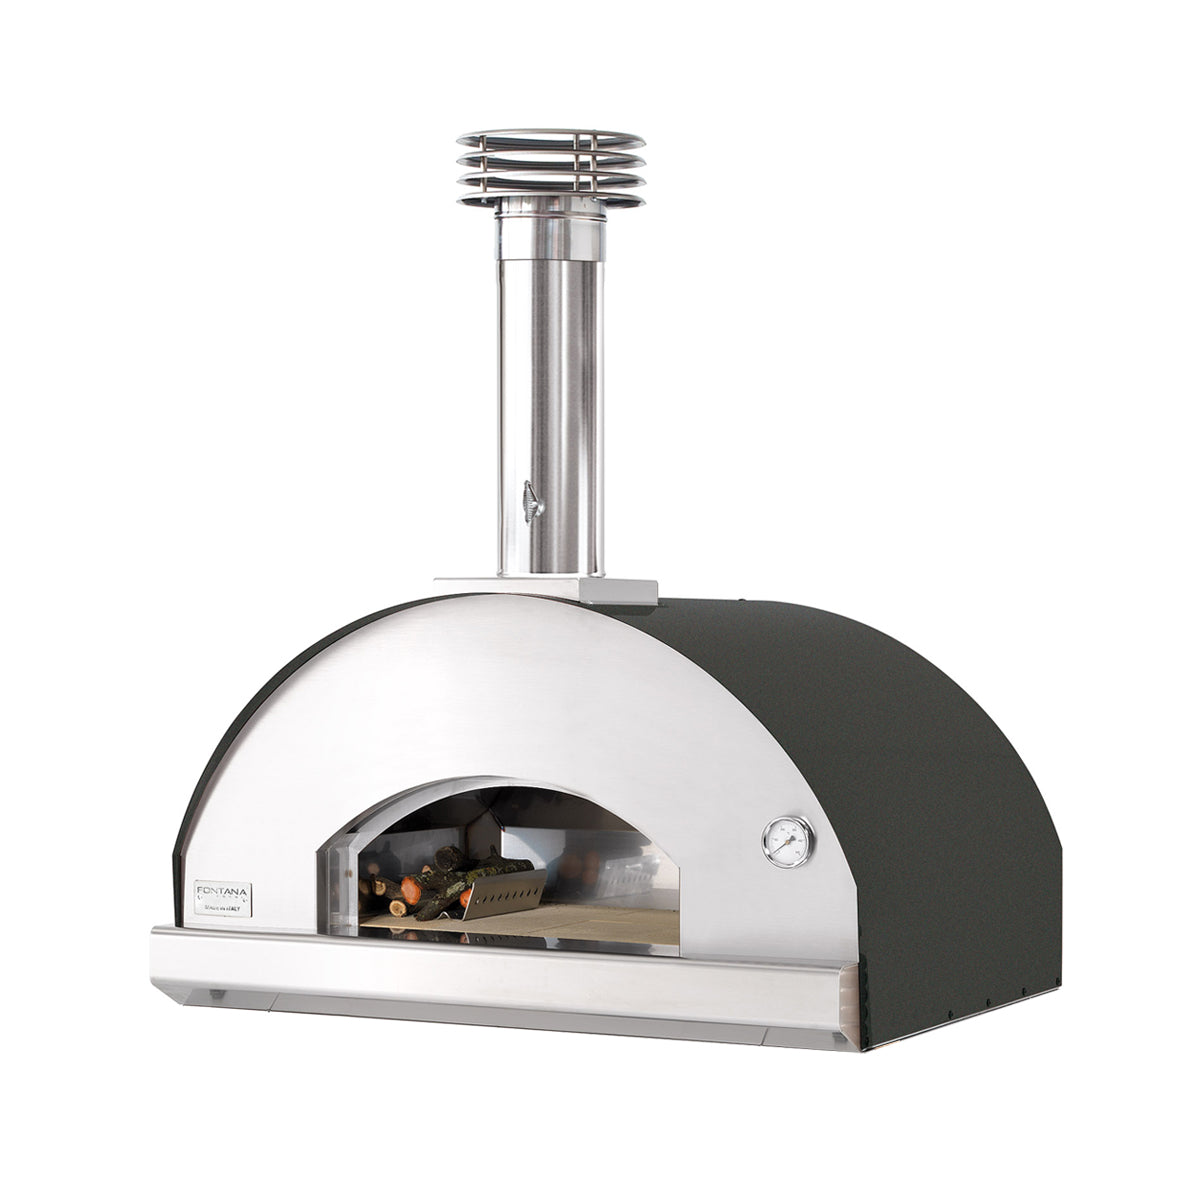 Fontana Forni Marinara Anthracite Built In Wood Fired Pizza Oven